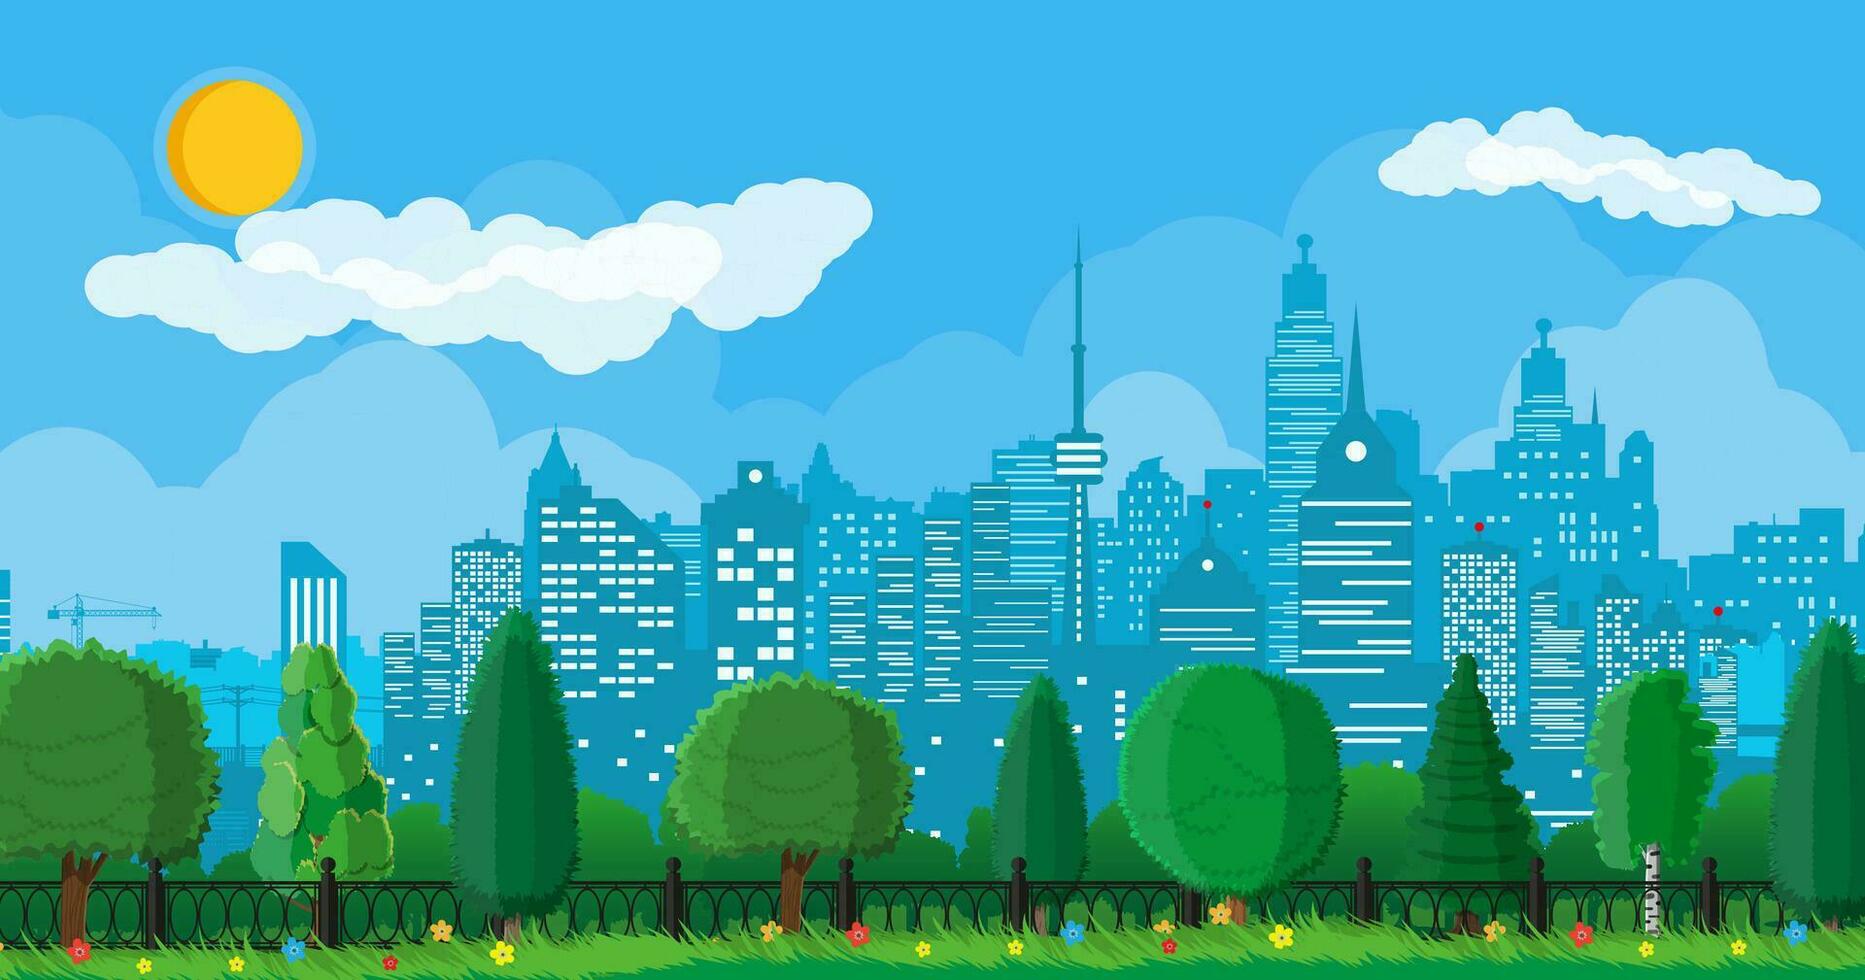 City park concept. Urban forest panorama with fence. Cityscape with buildings and trees. Sky with clouds and sun. Leisure time in summer city park. Vector illustration in flat style